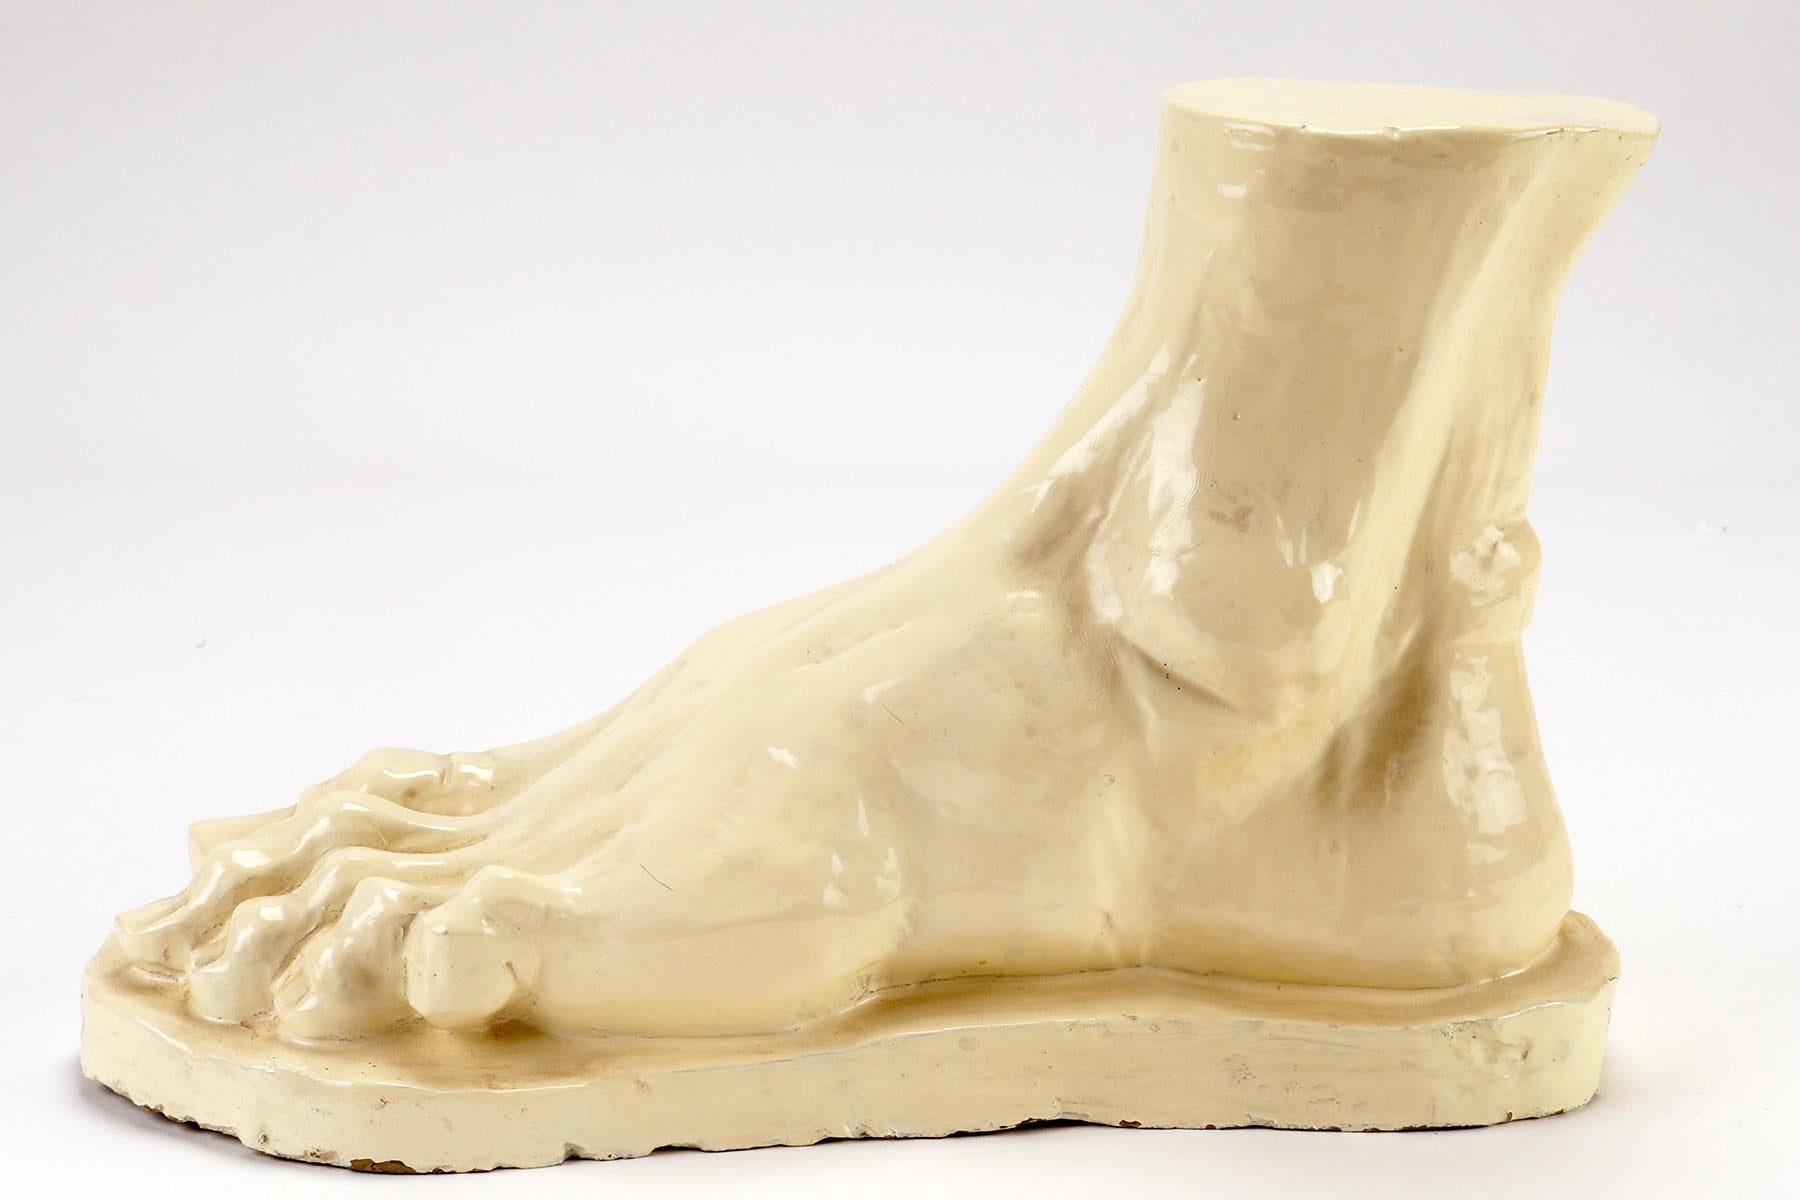 Glazed Clay Sculpture Depicting a Foot, Italy, 1900 For Sale 2